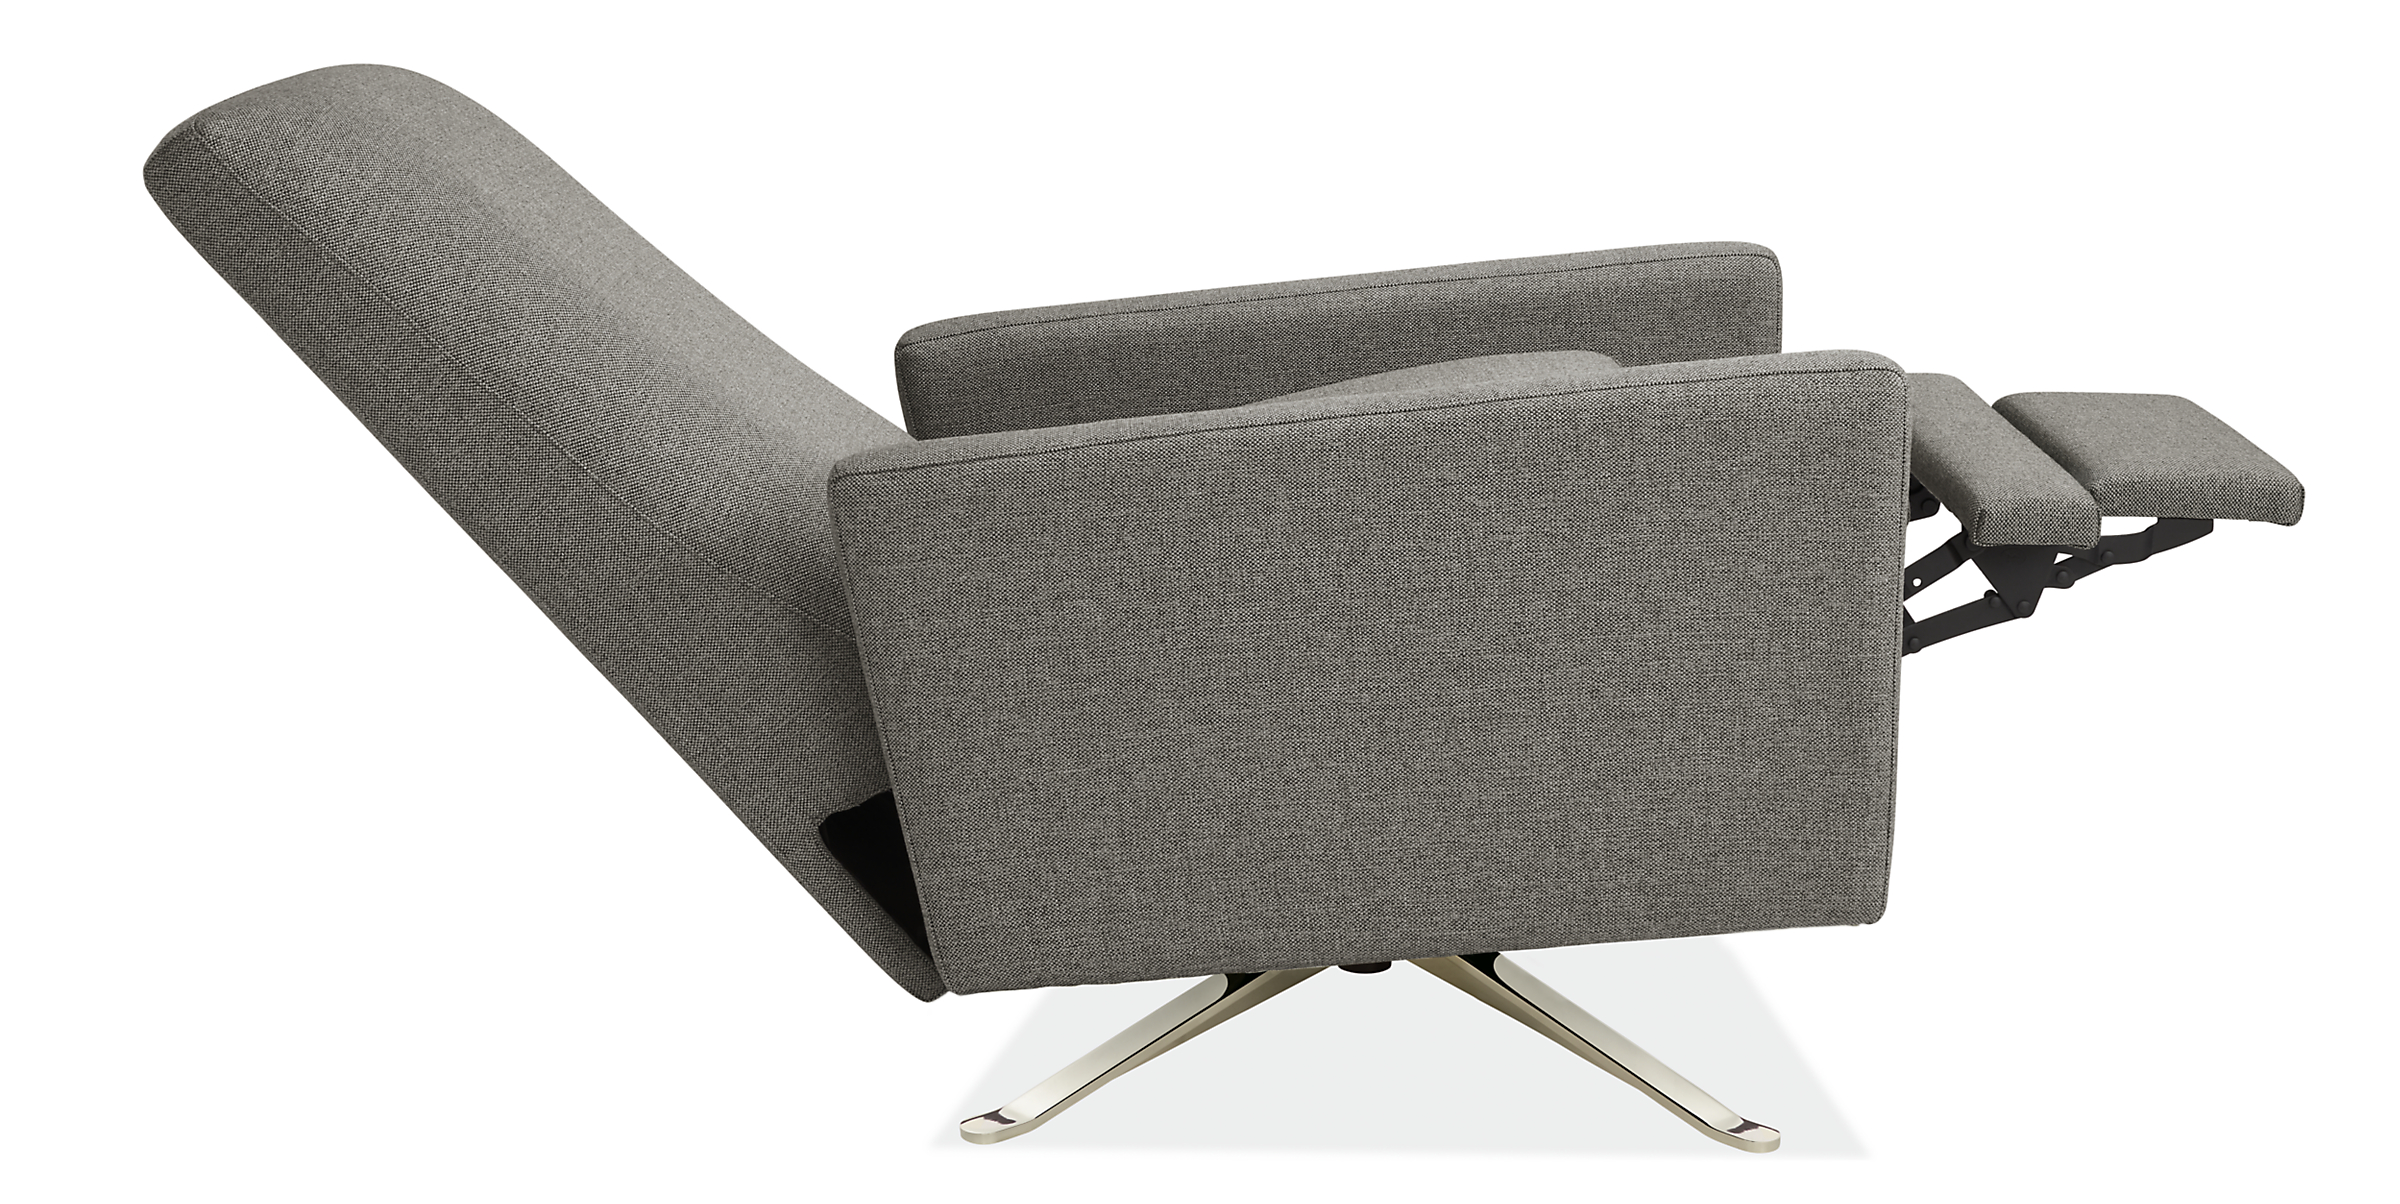 Open side view of Arlo Thin-Arm Recliner in Tatum Fabric with Metal Swivel Base.